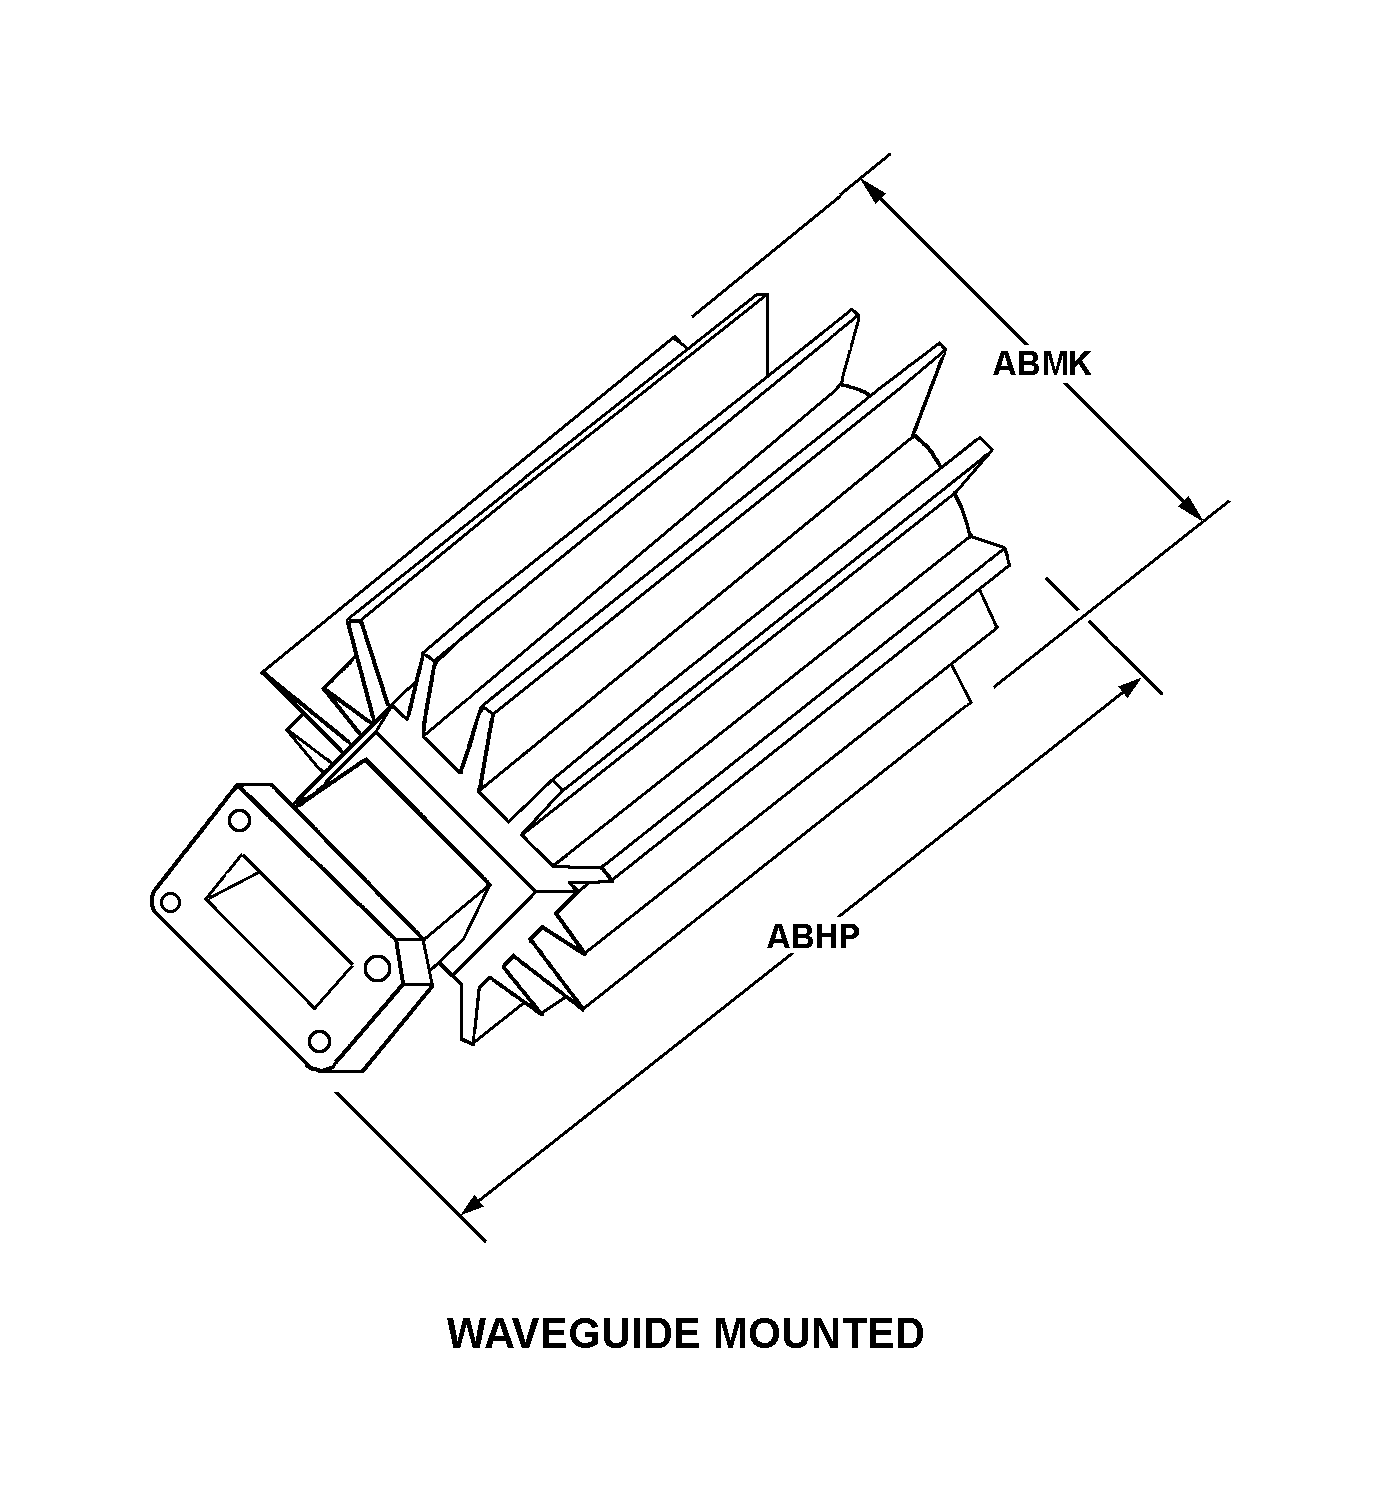 WAVEGUIDE MOUNTED style nsn 5985-01-110-1985